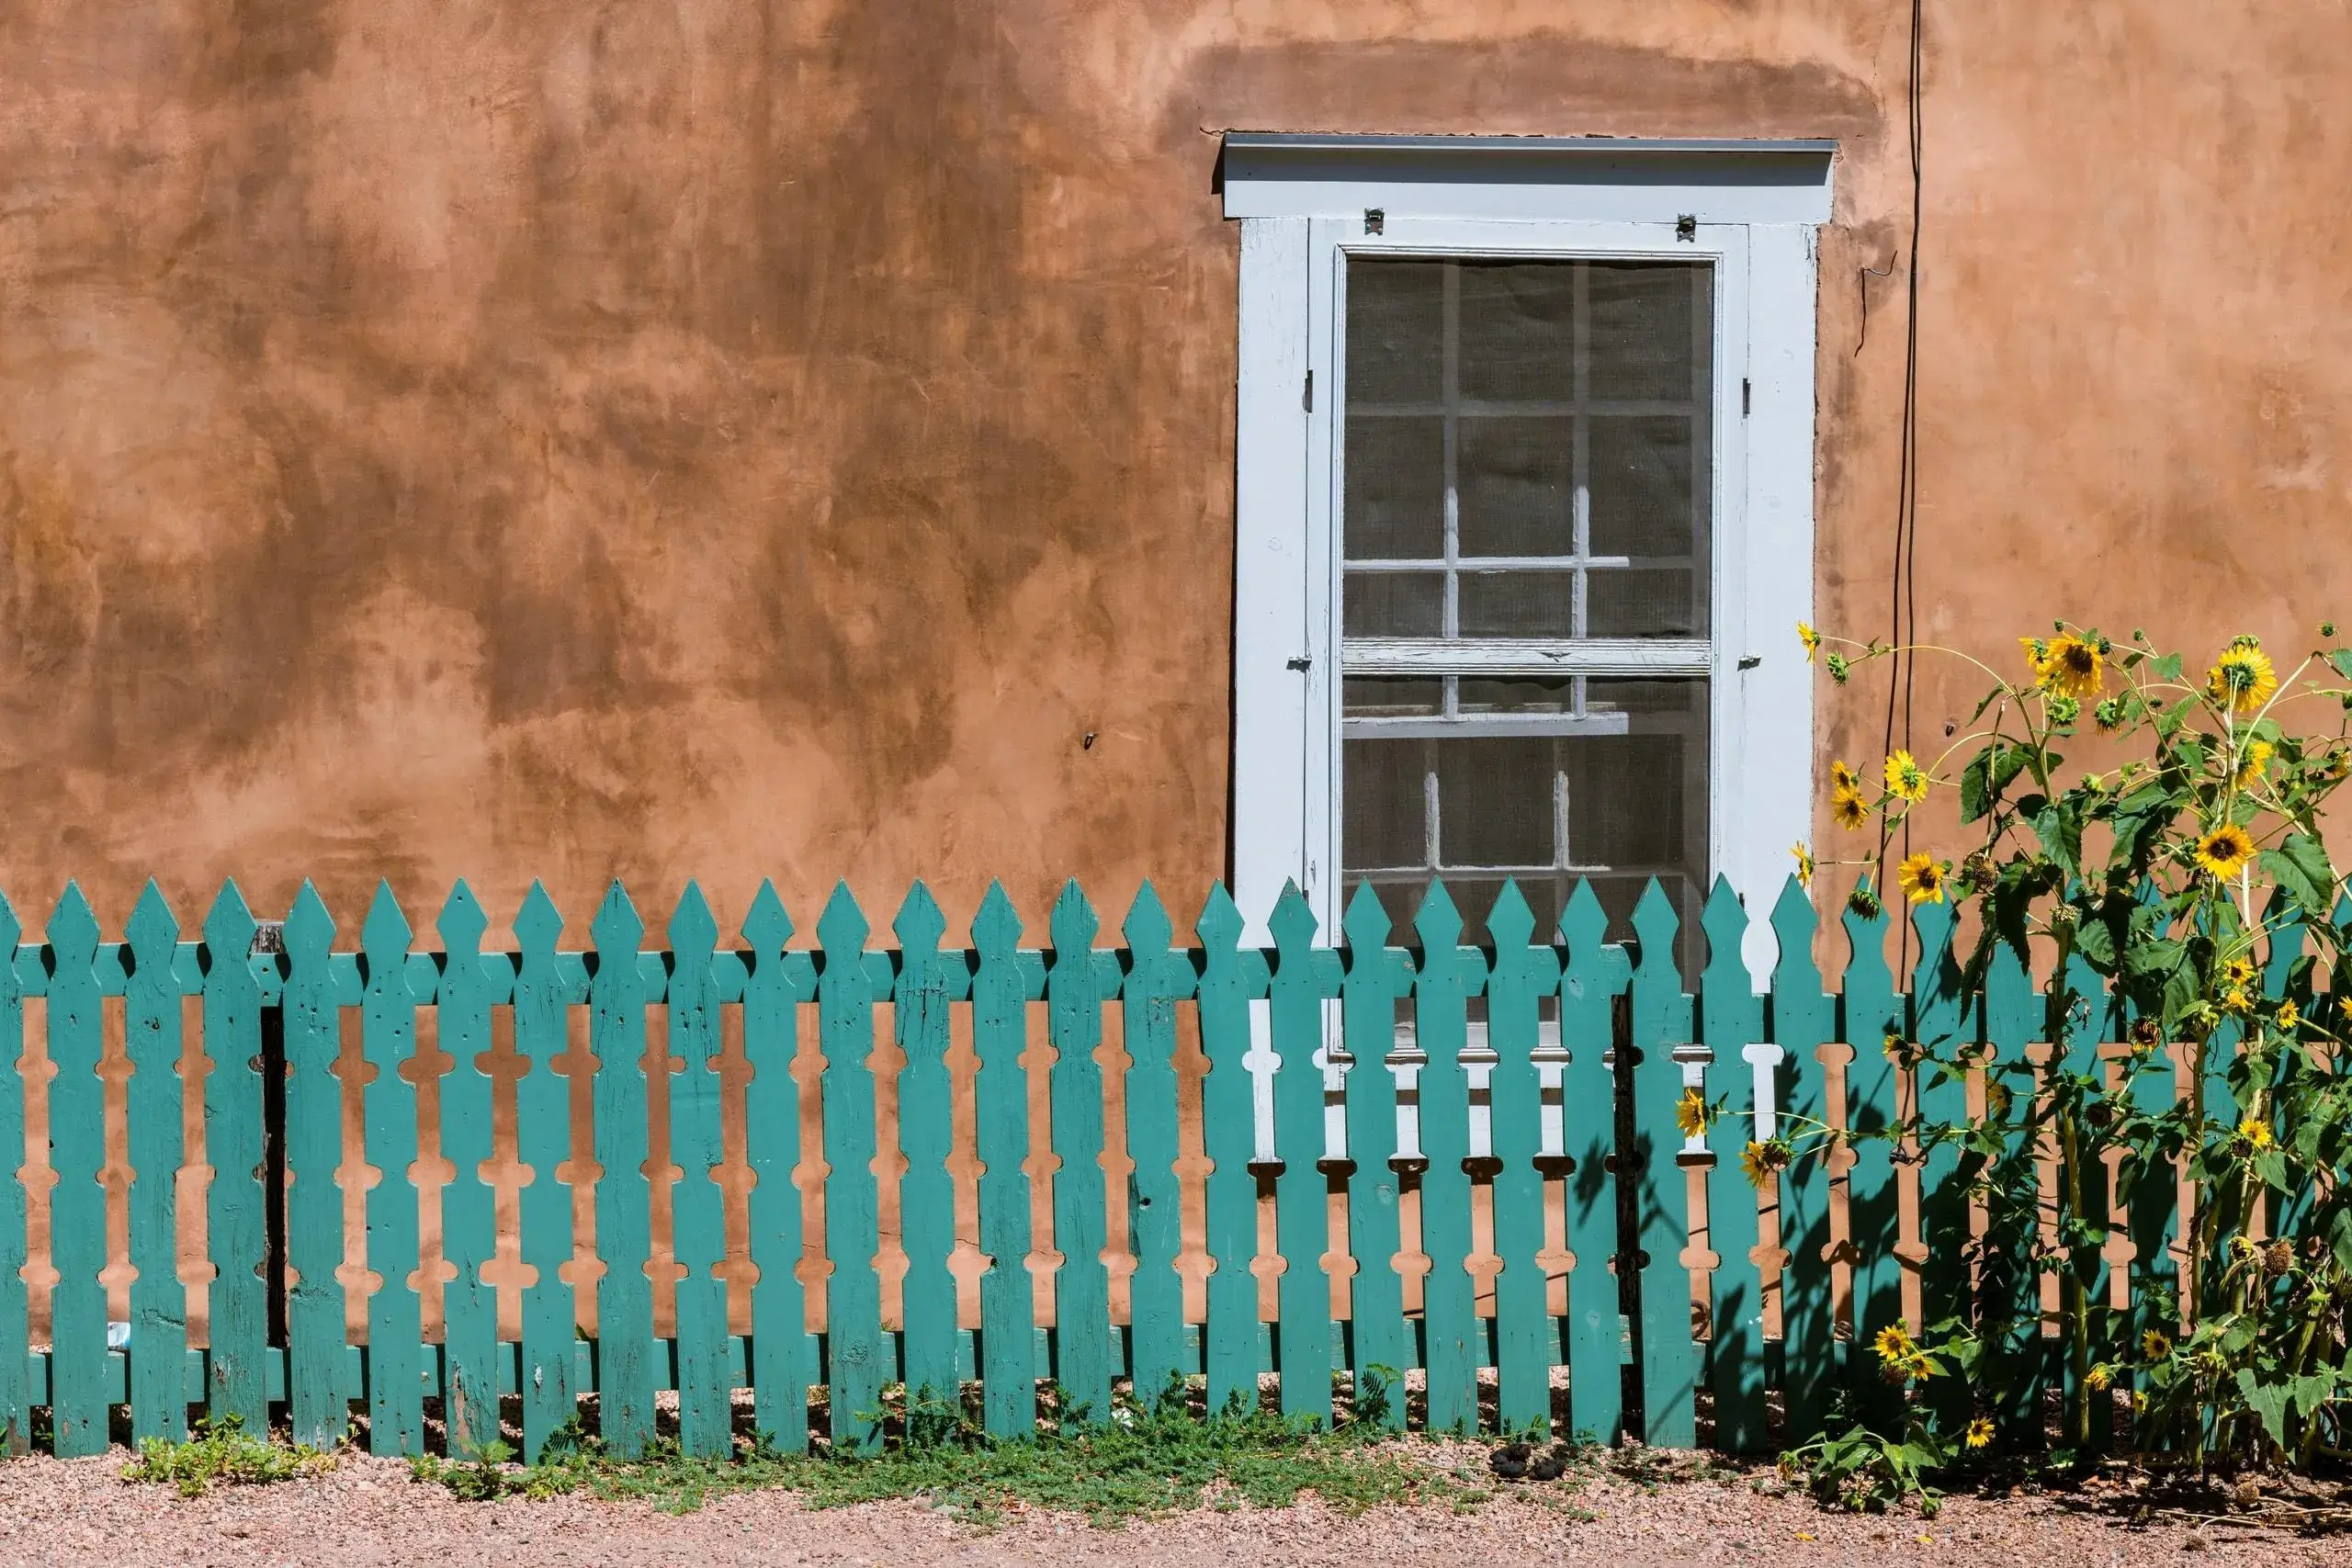 Exterior of adobe style home with blue fence, Santa Fe